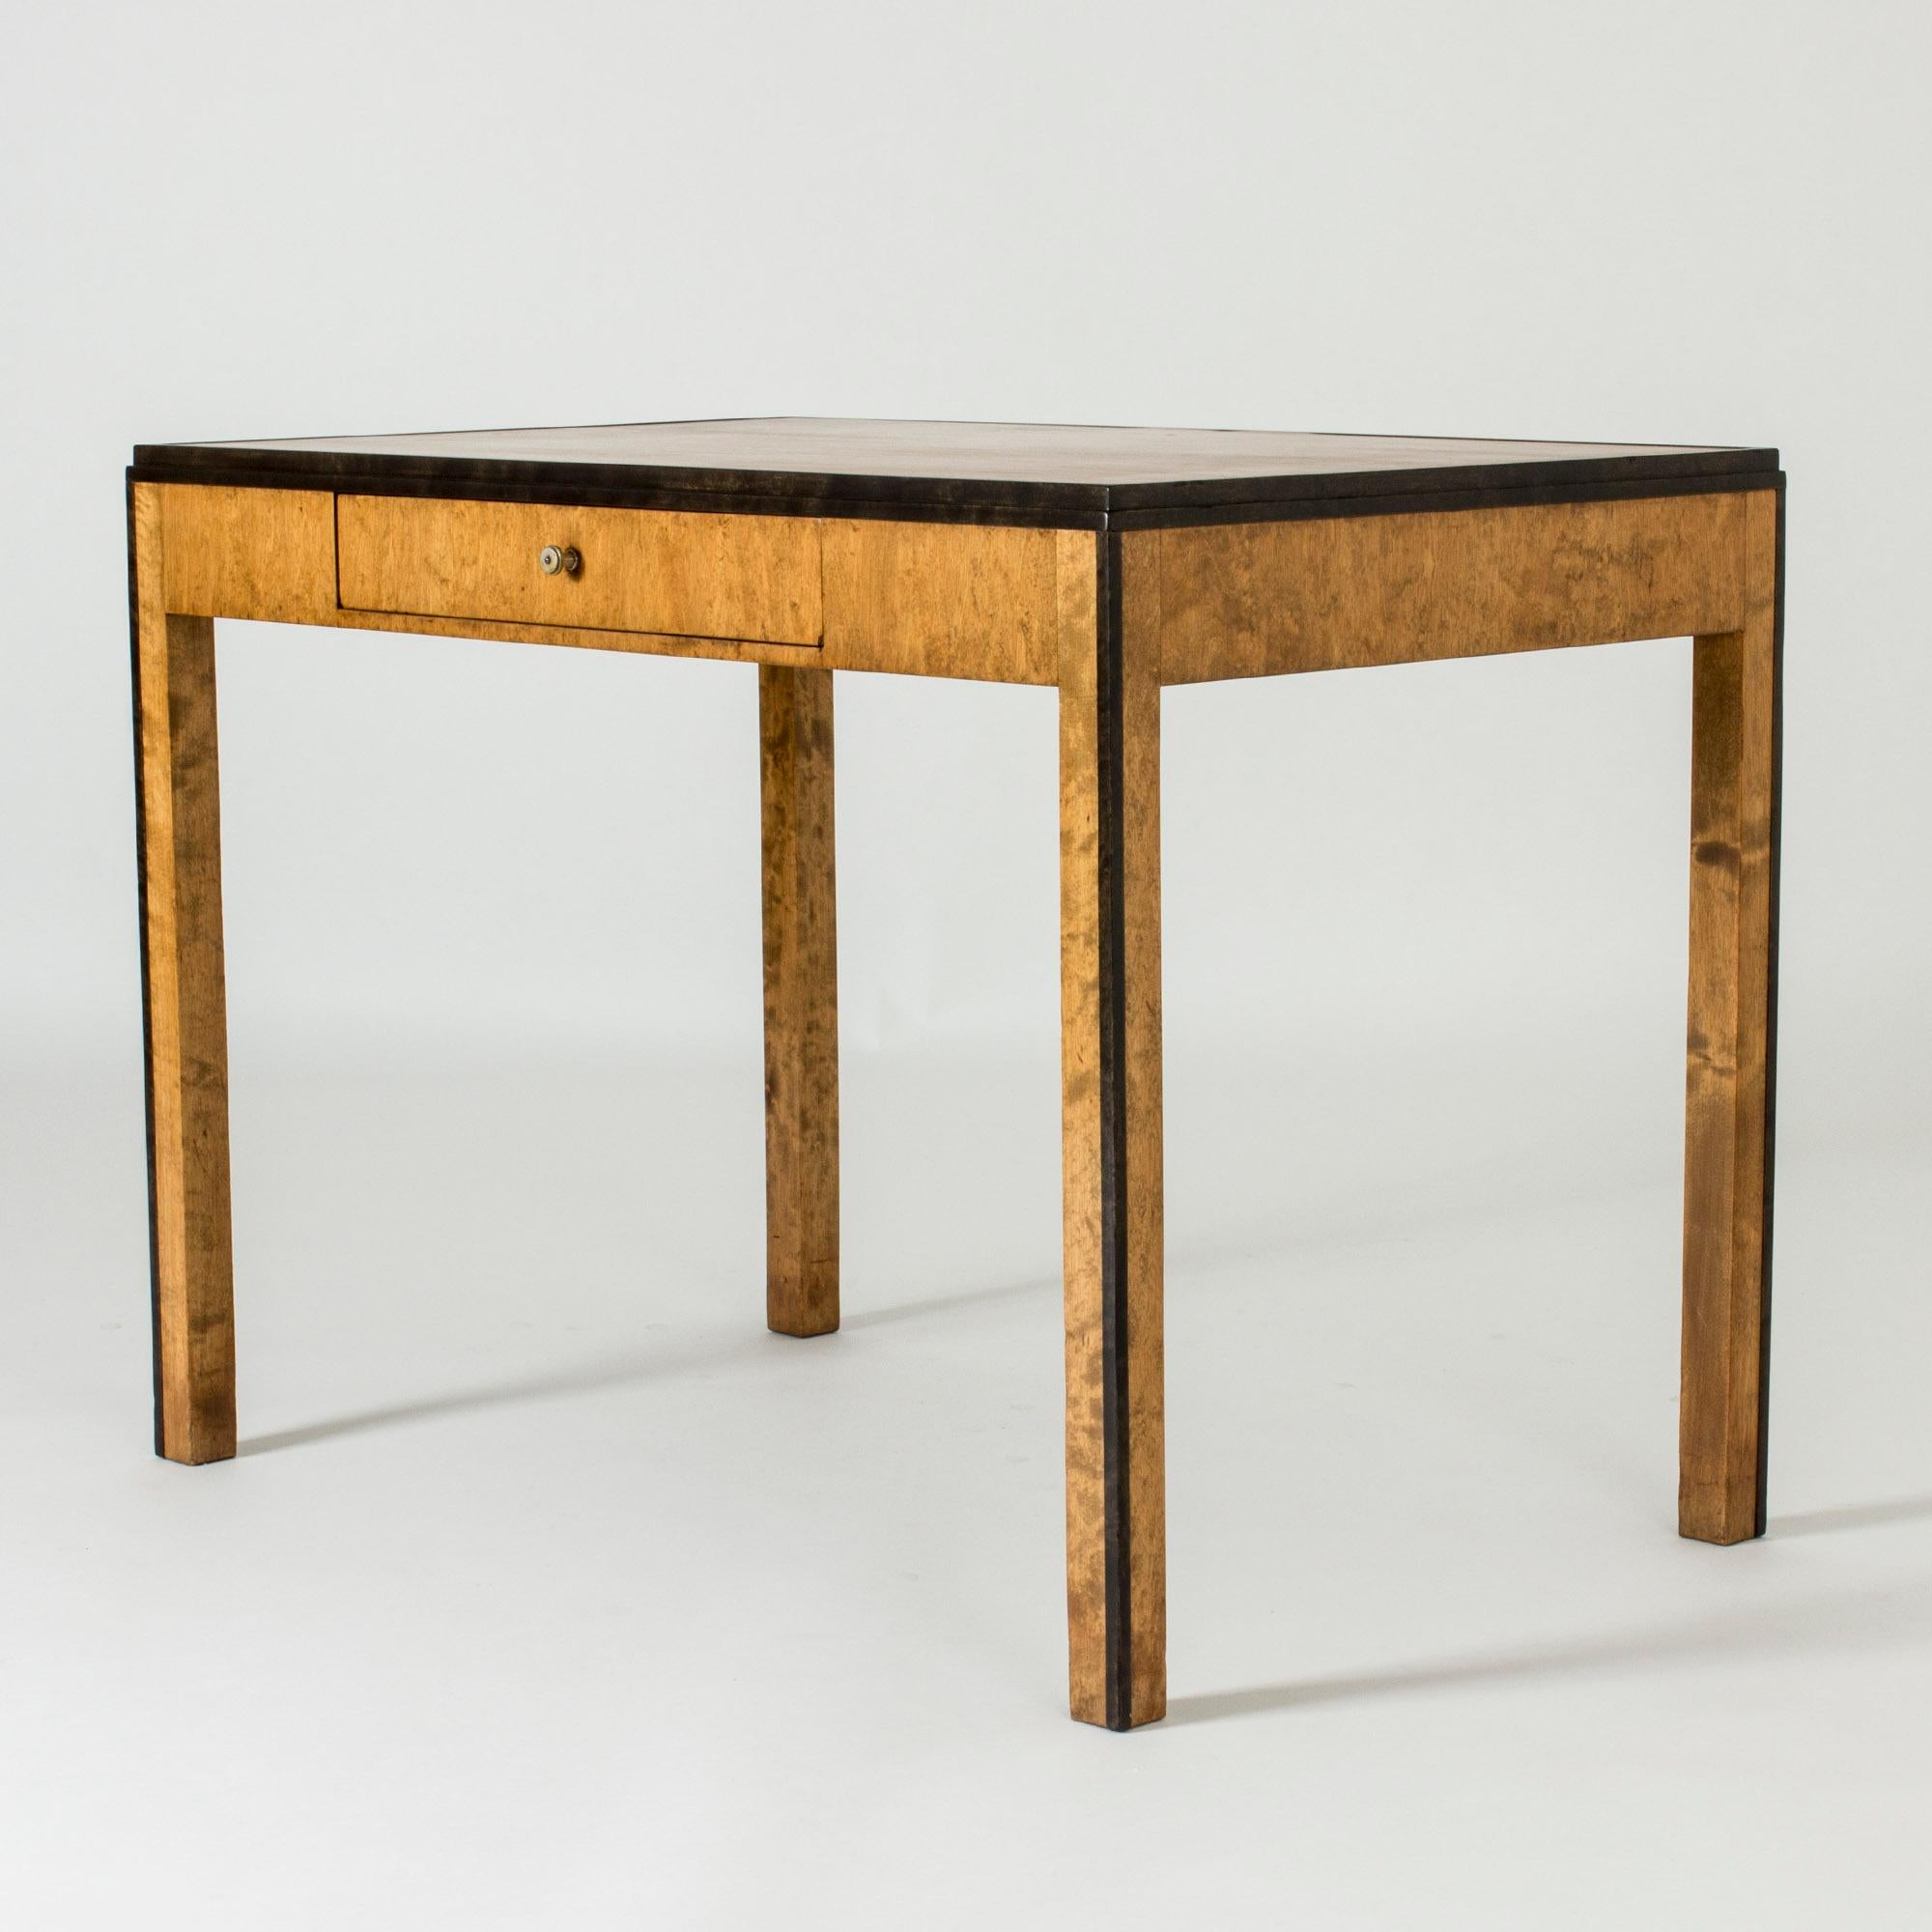 Elegant functionalist desk “Sara” by Axel Einar Hjort, with clean lines. Made from birch with lively woodgrain. Black stripes along the legs and around the tabletop accentuate the silhouette. Neat size.

Provenance: This piece was purchased from